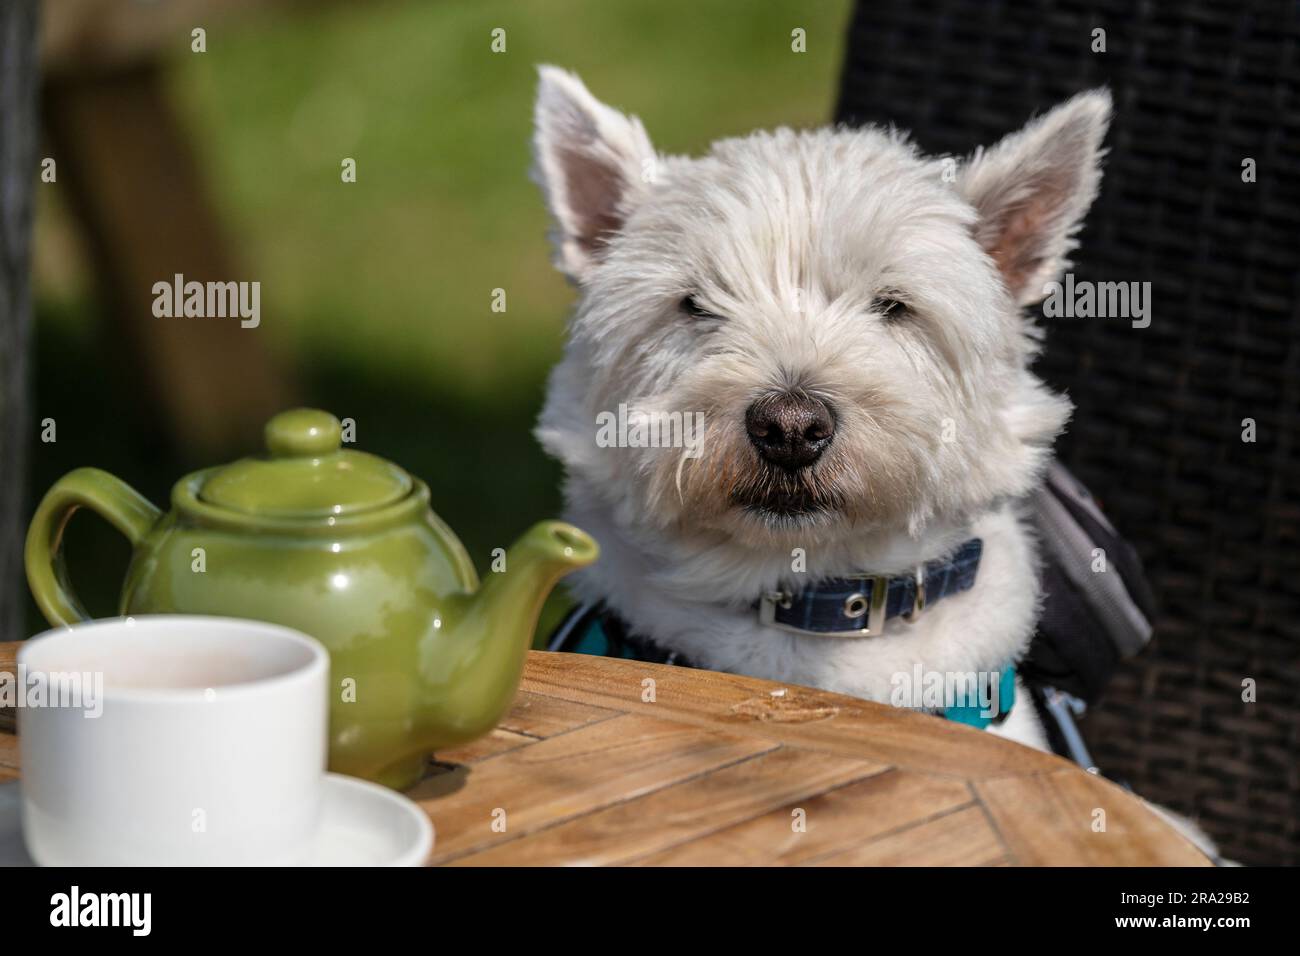 A Westie West Highlander White Terrier sitting on a chair at a table. Stock Photo